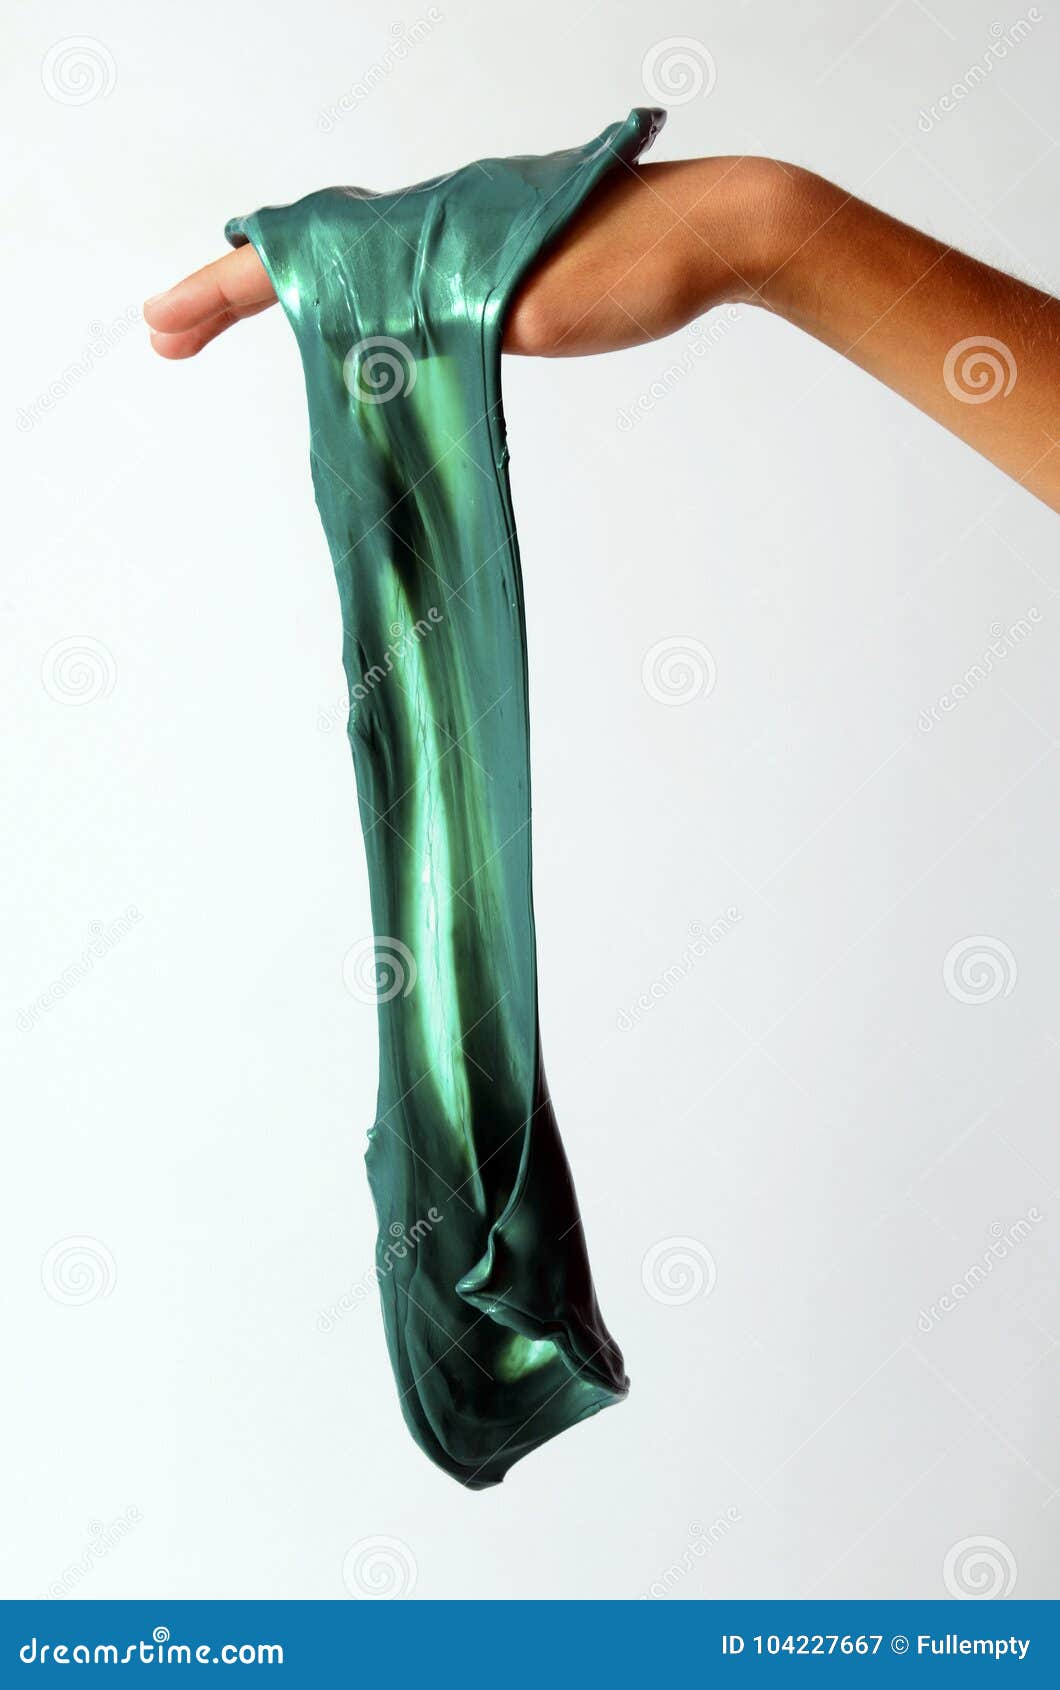 slime elastic and viscous on child`s hand